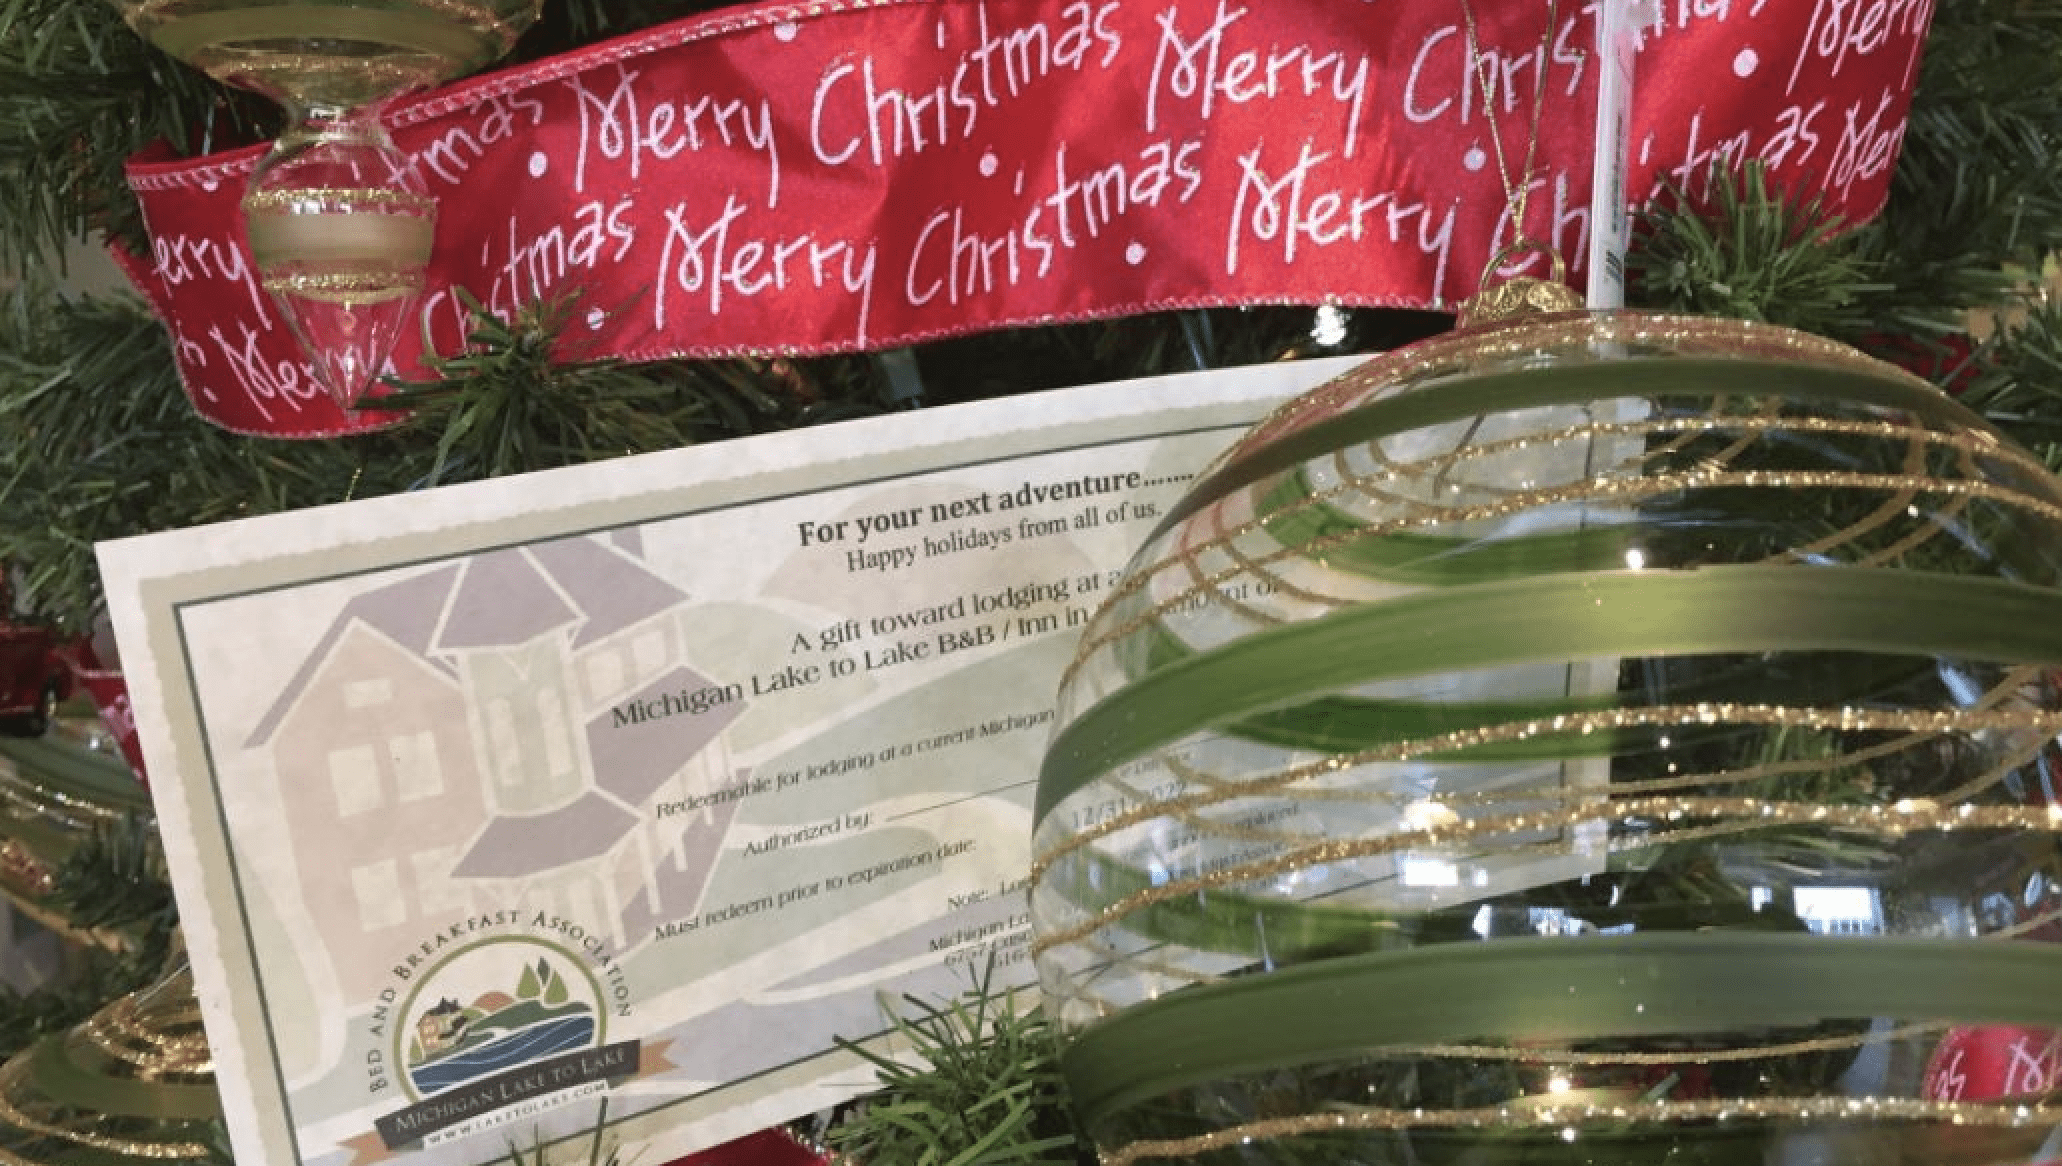 Michigan bed and breakfast gift certificate on a Christmas tree